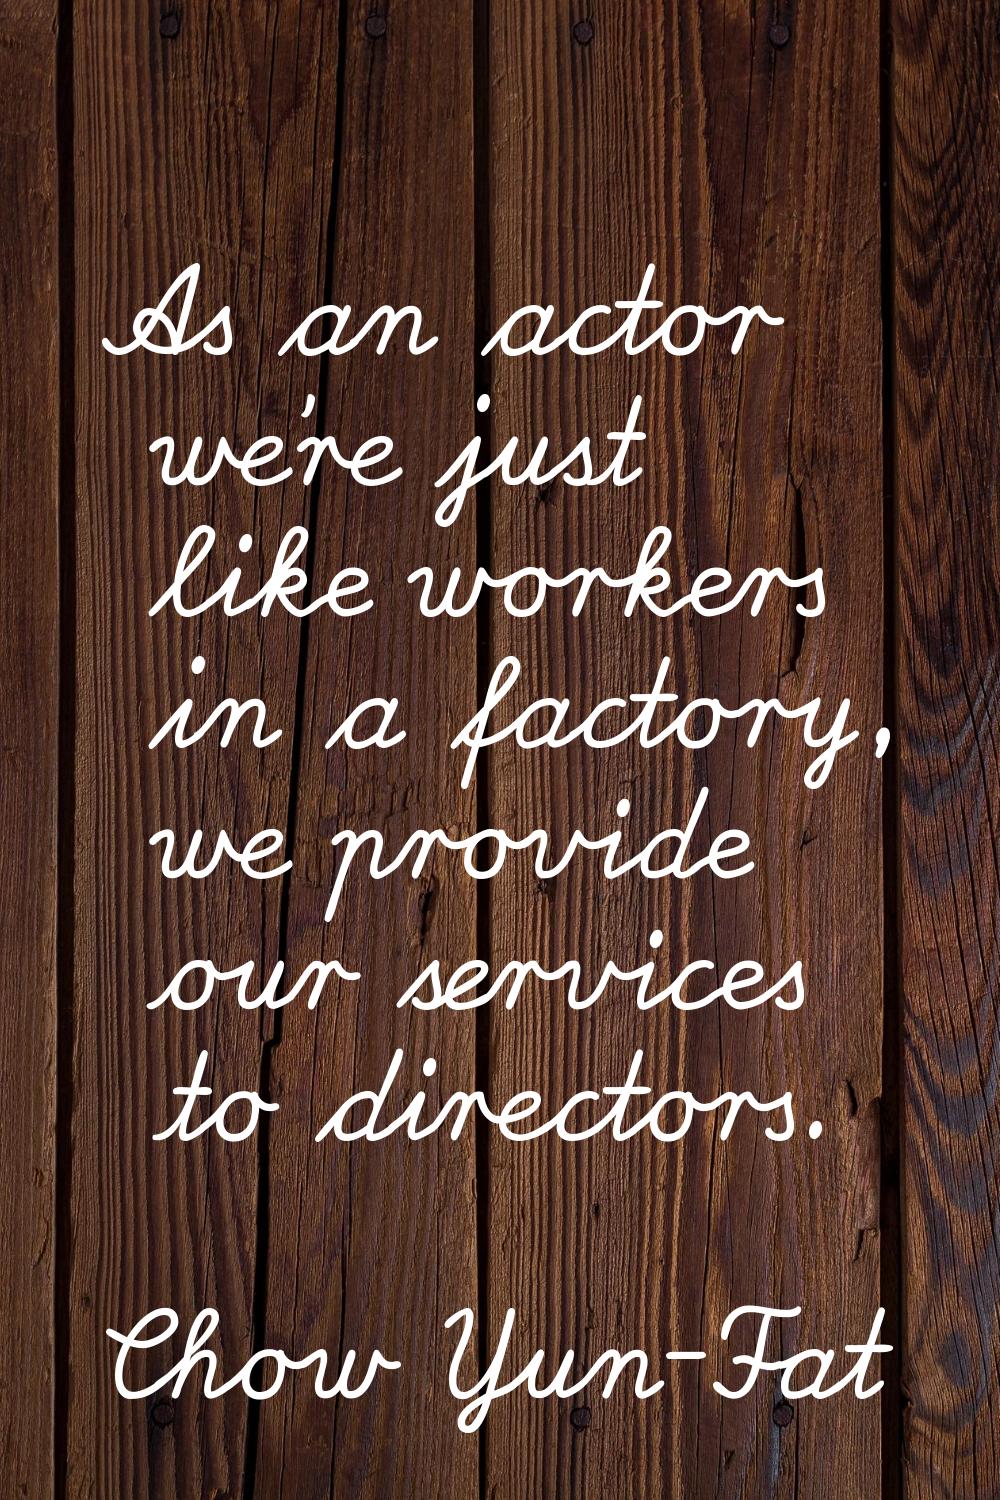 As an actor we're just like workers in a factory, we provide our services to directors.